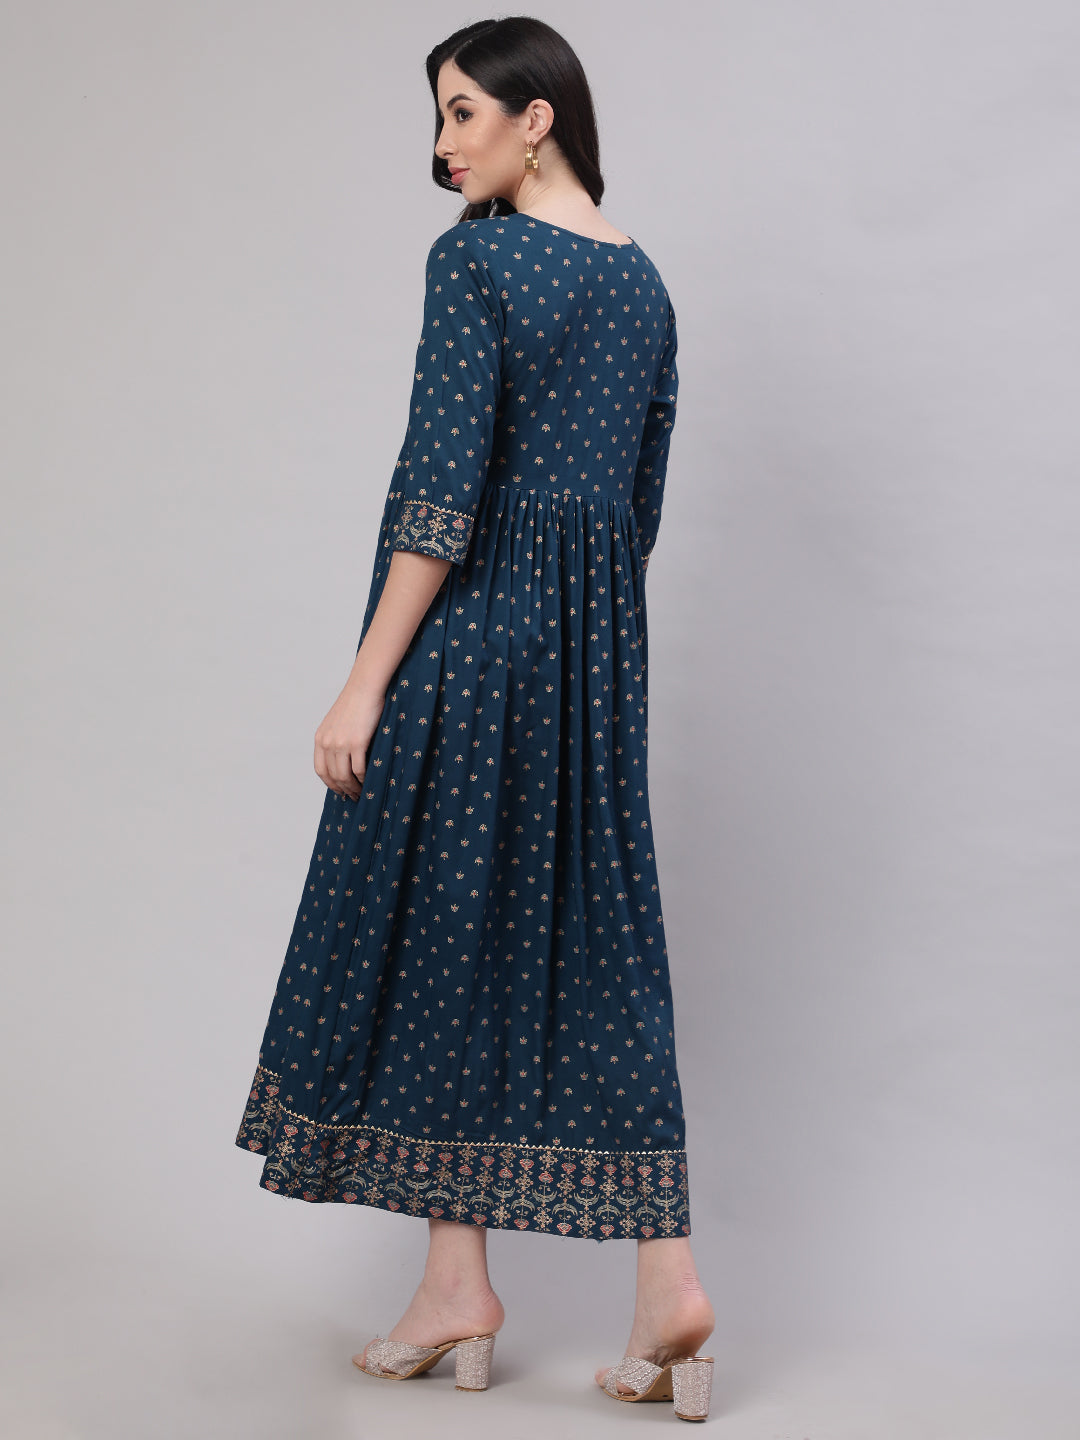 Women's Wome Teal Blue Ethinc Printed Flared Dress With Three Quarter sleeves - Nayo Clothing